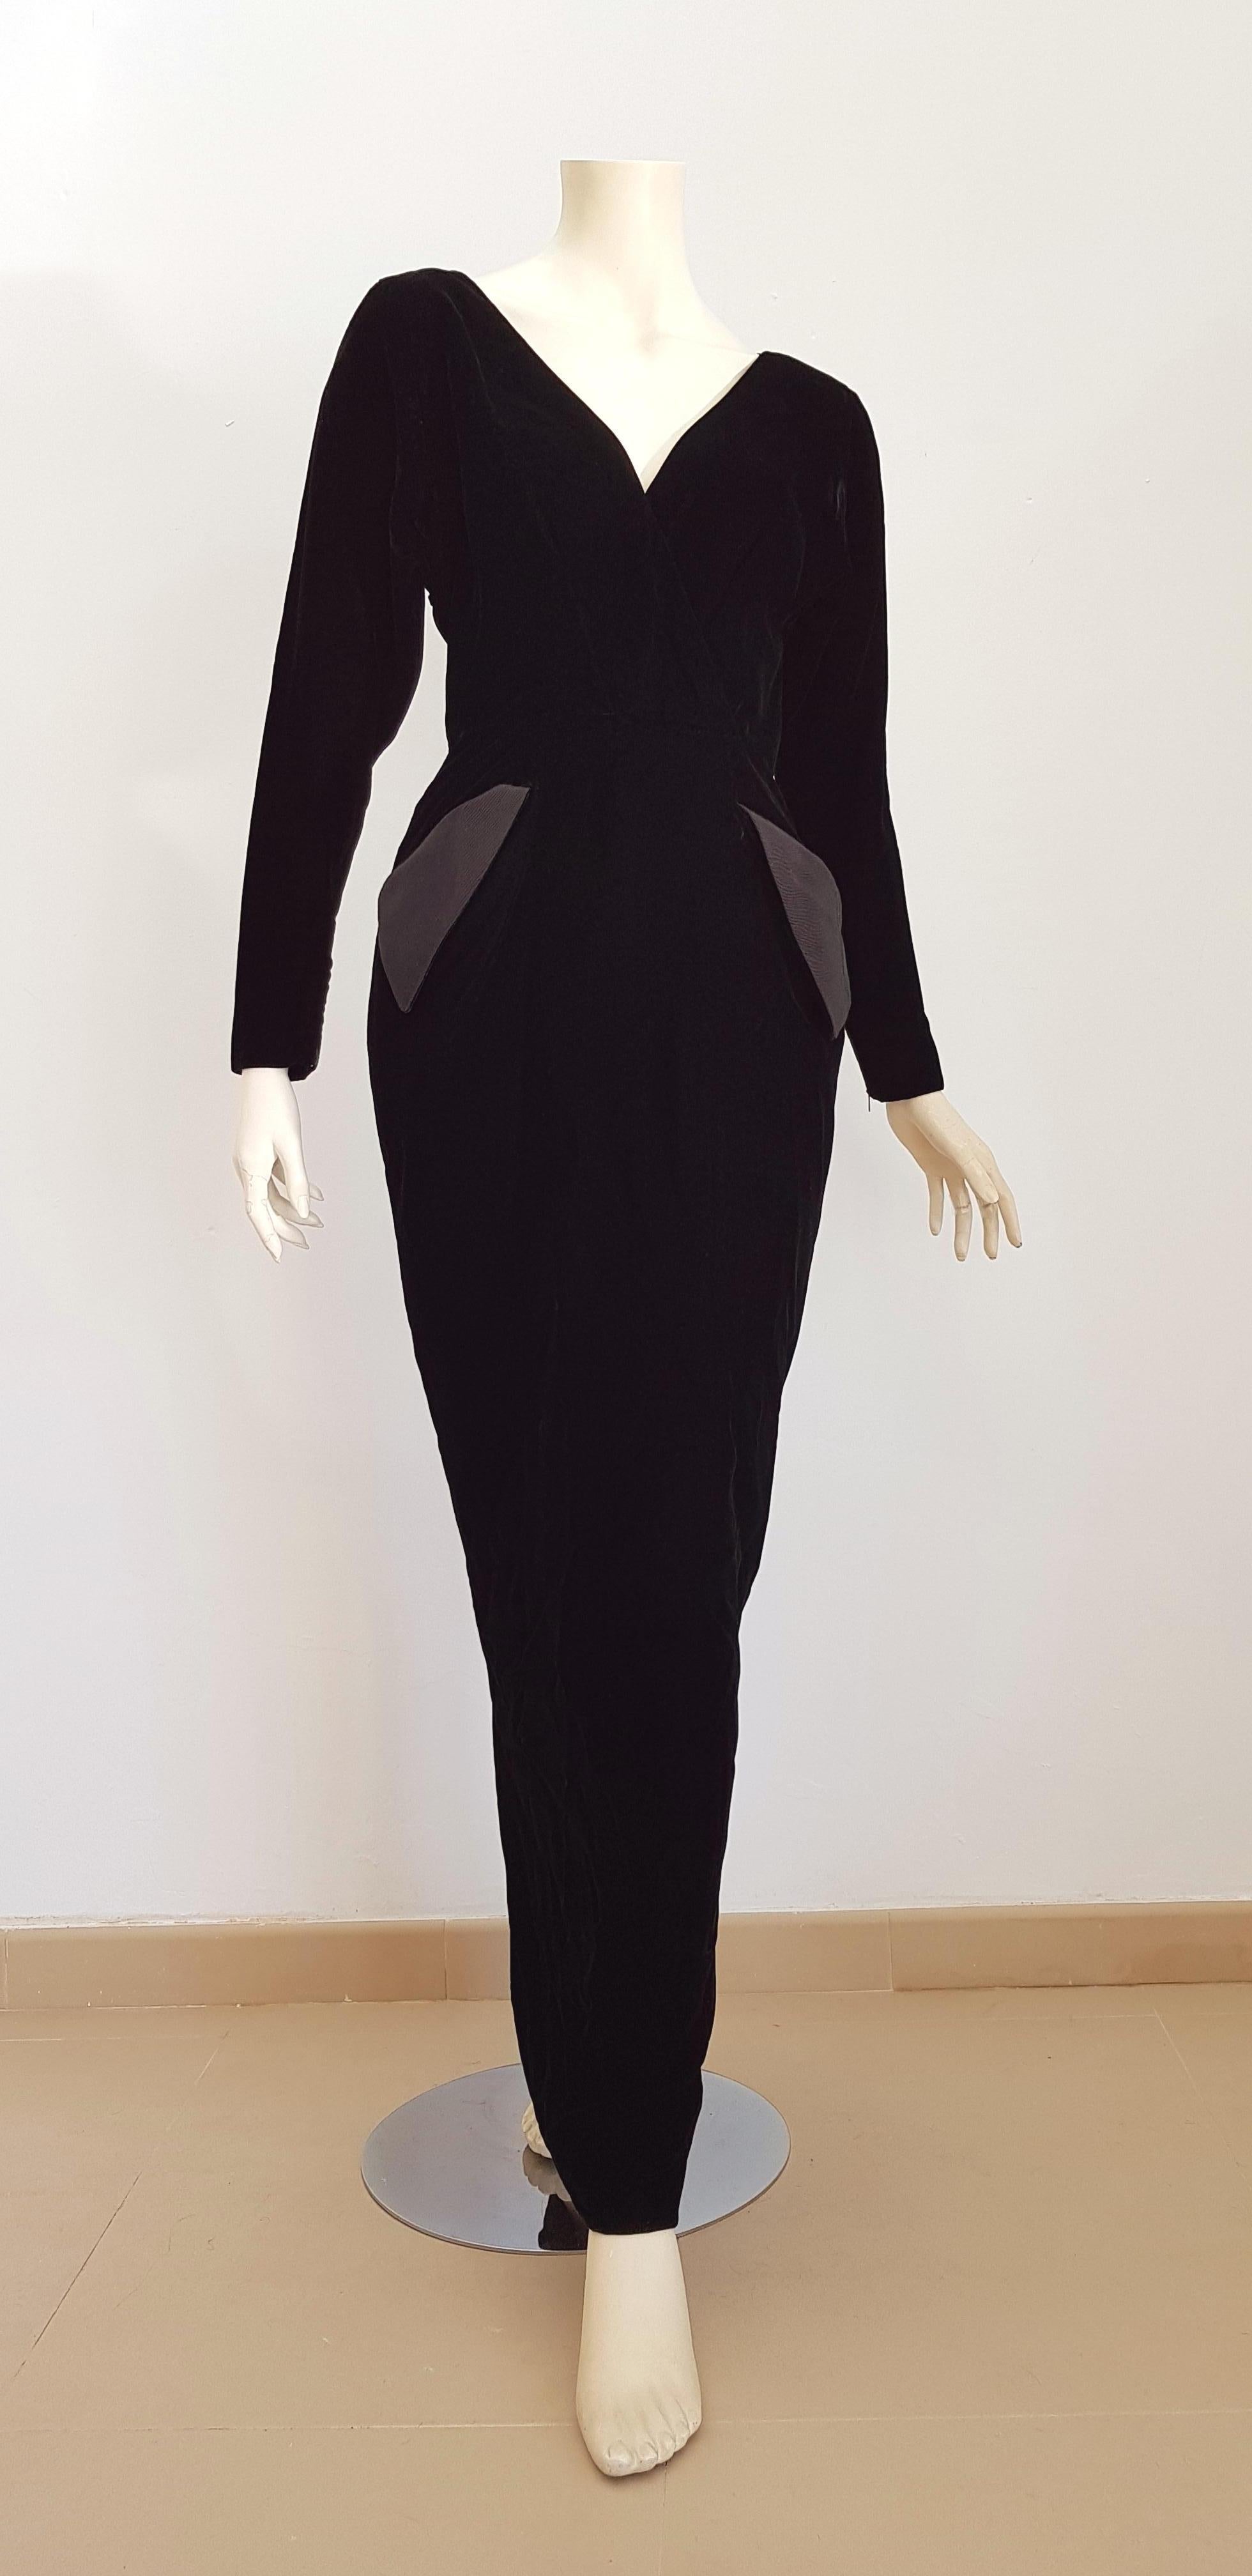 Christian DIOR Couture, black cotton velvet gown, with silk triangular pockets, buttoned behind - Unworn, New

SIZE: equivalent to about Small / Medium, please review approx measurements as follows in cm: lenght 144, chest underarm to underarm 50,